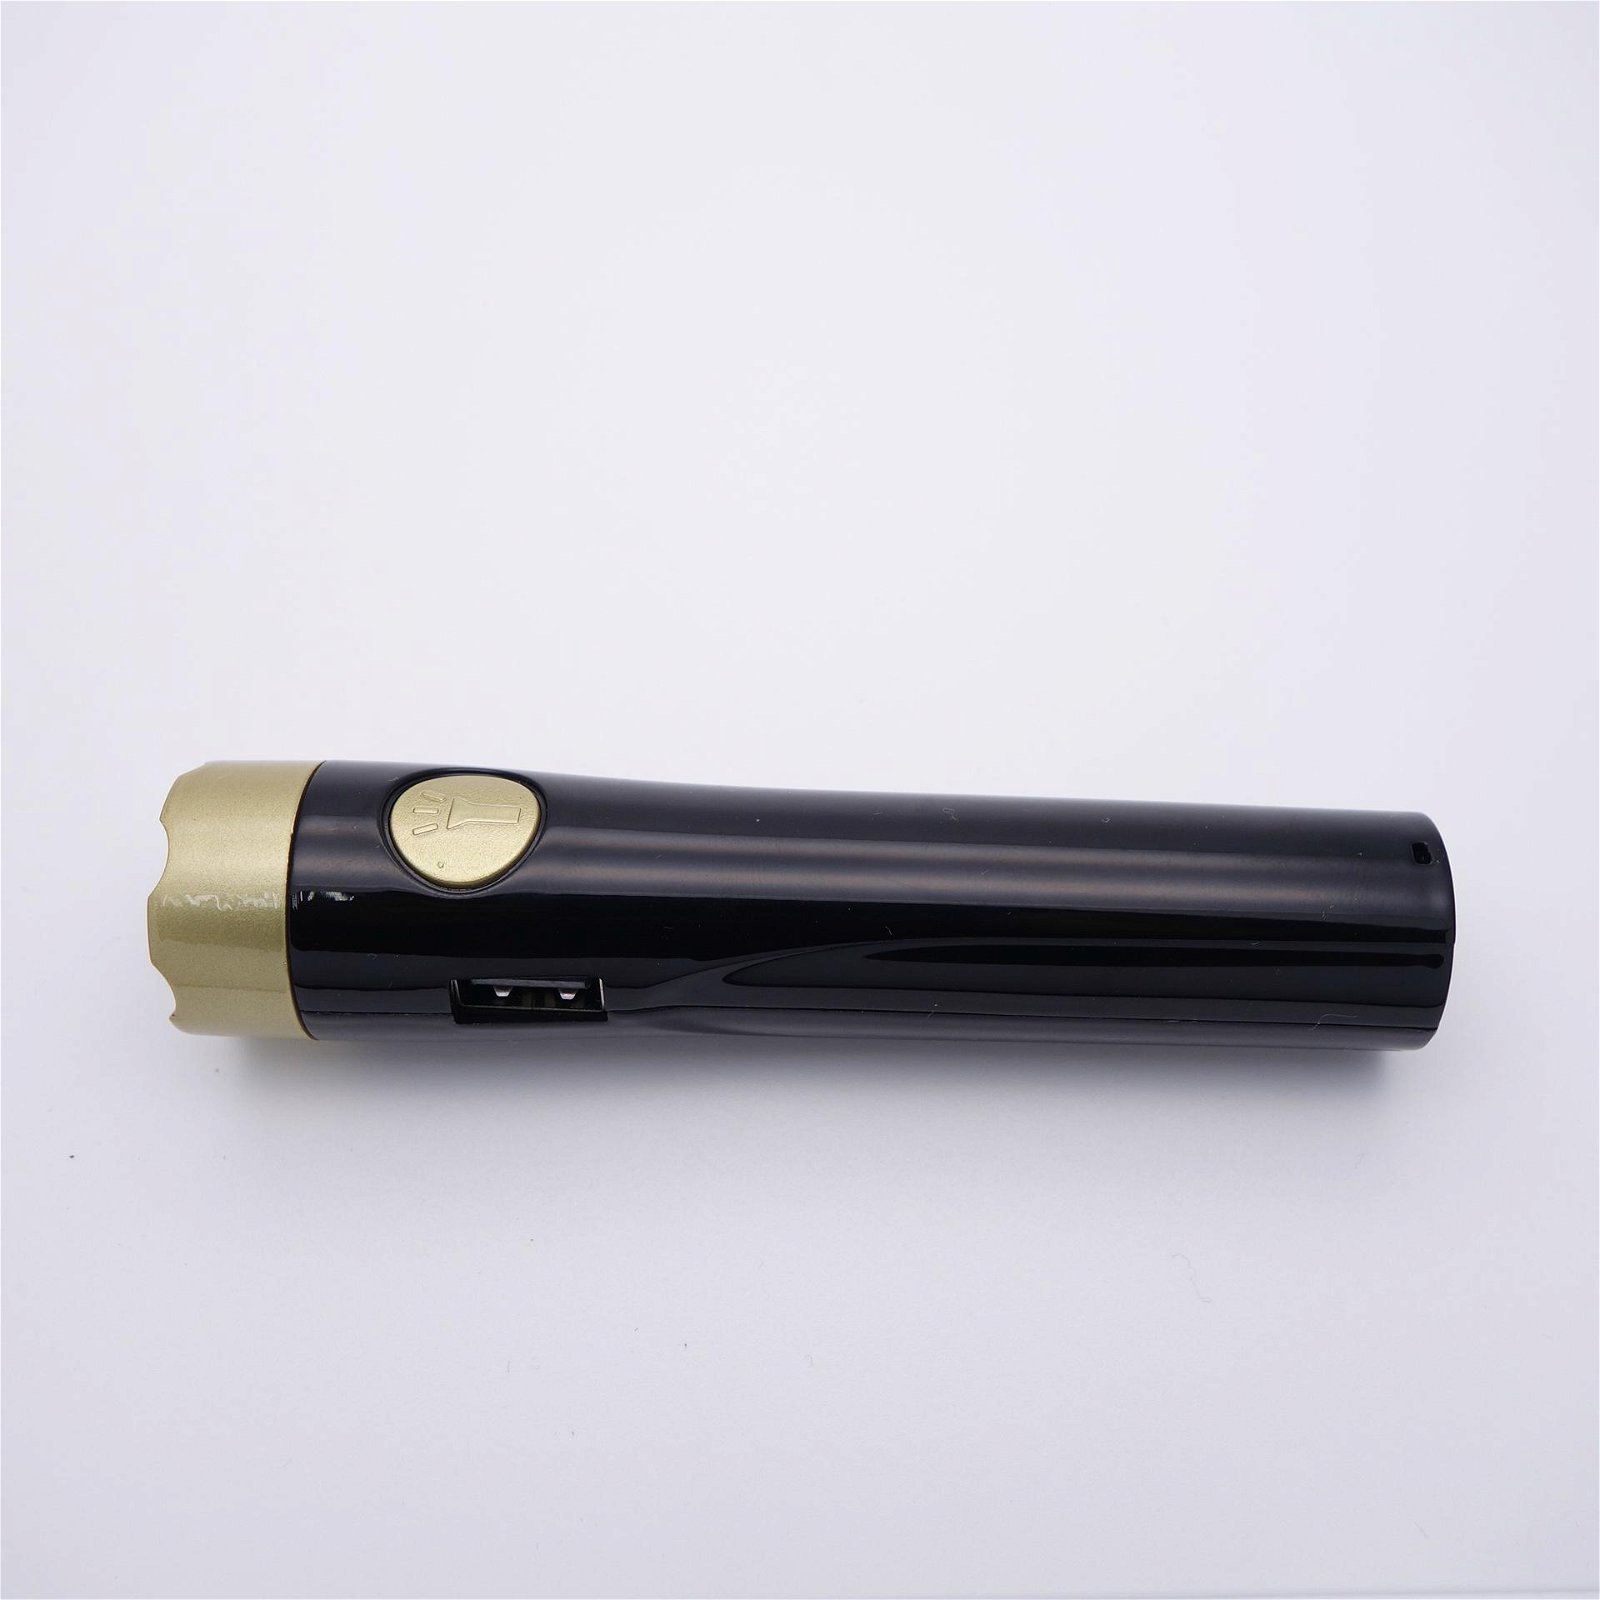 Wholesale Light and Portable Power Bank 2